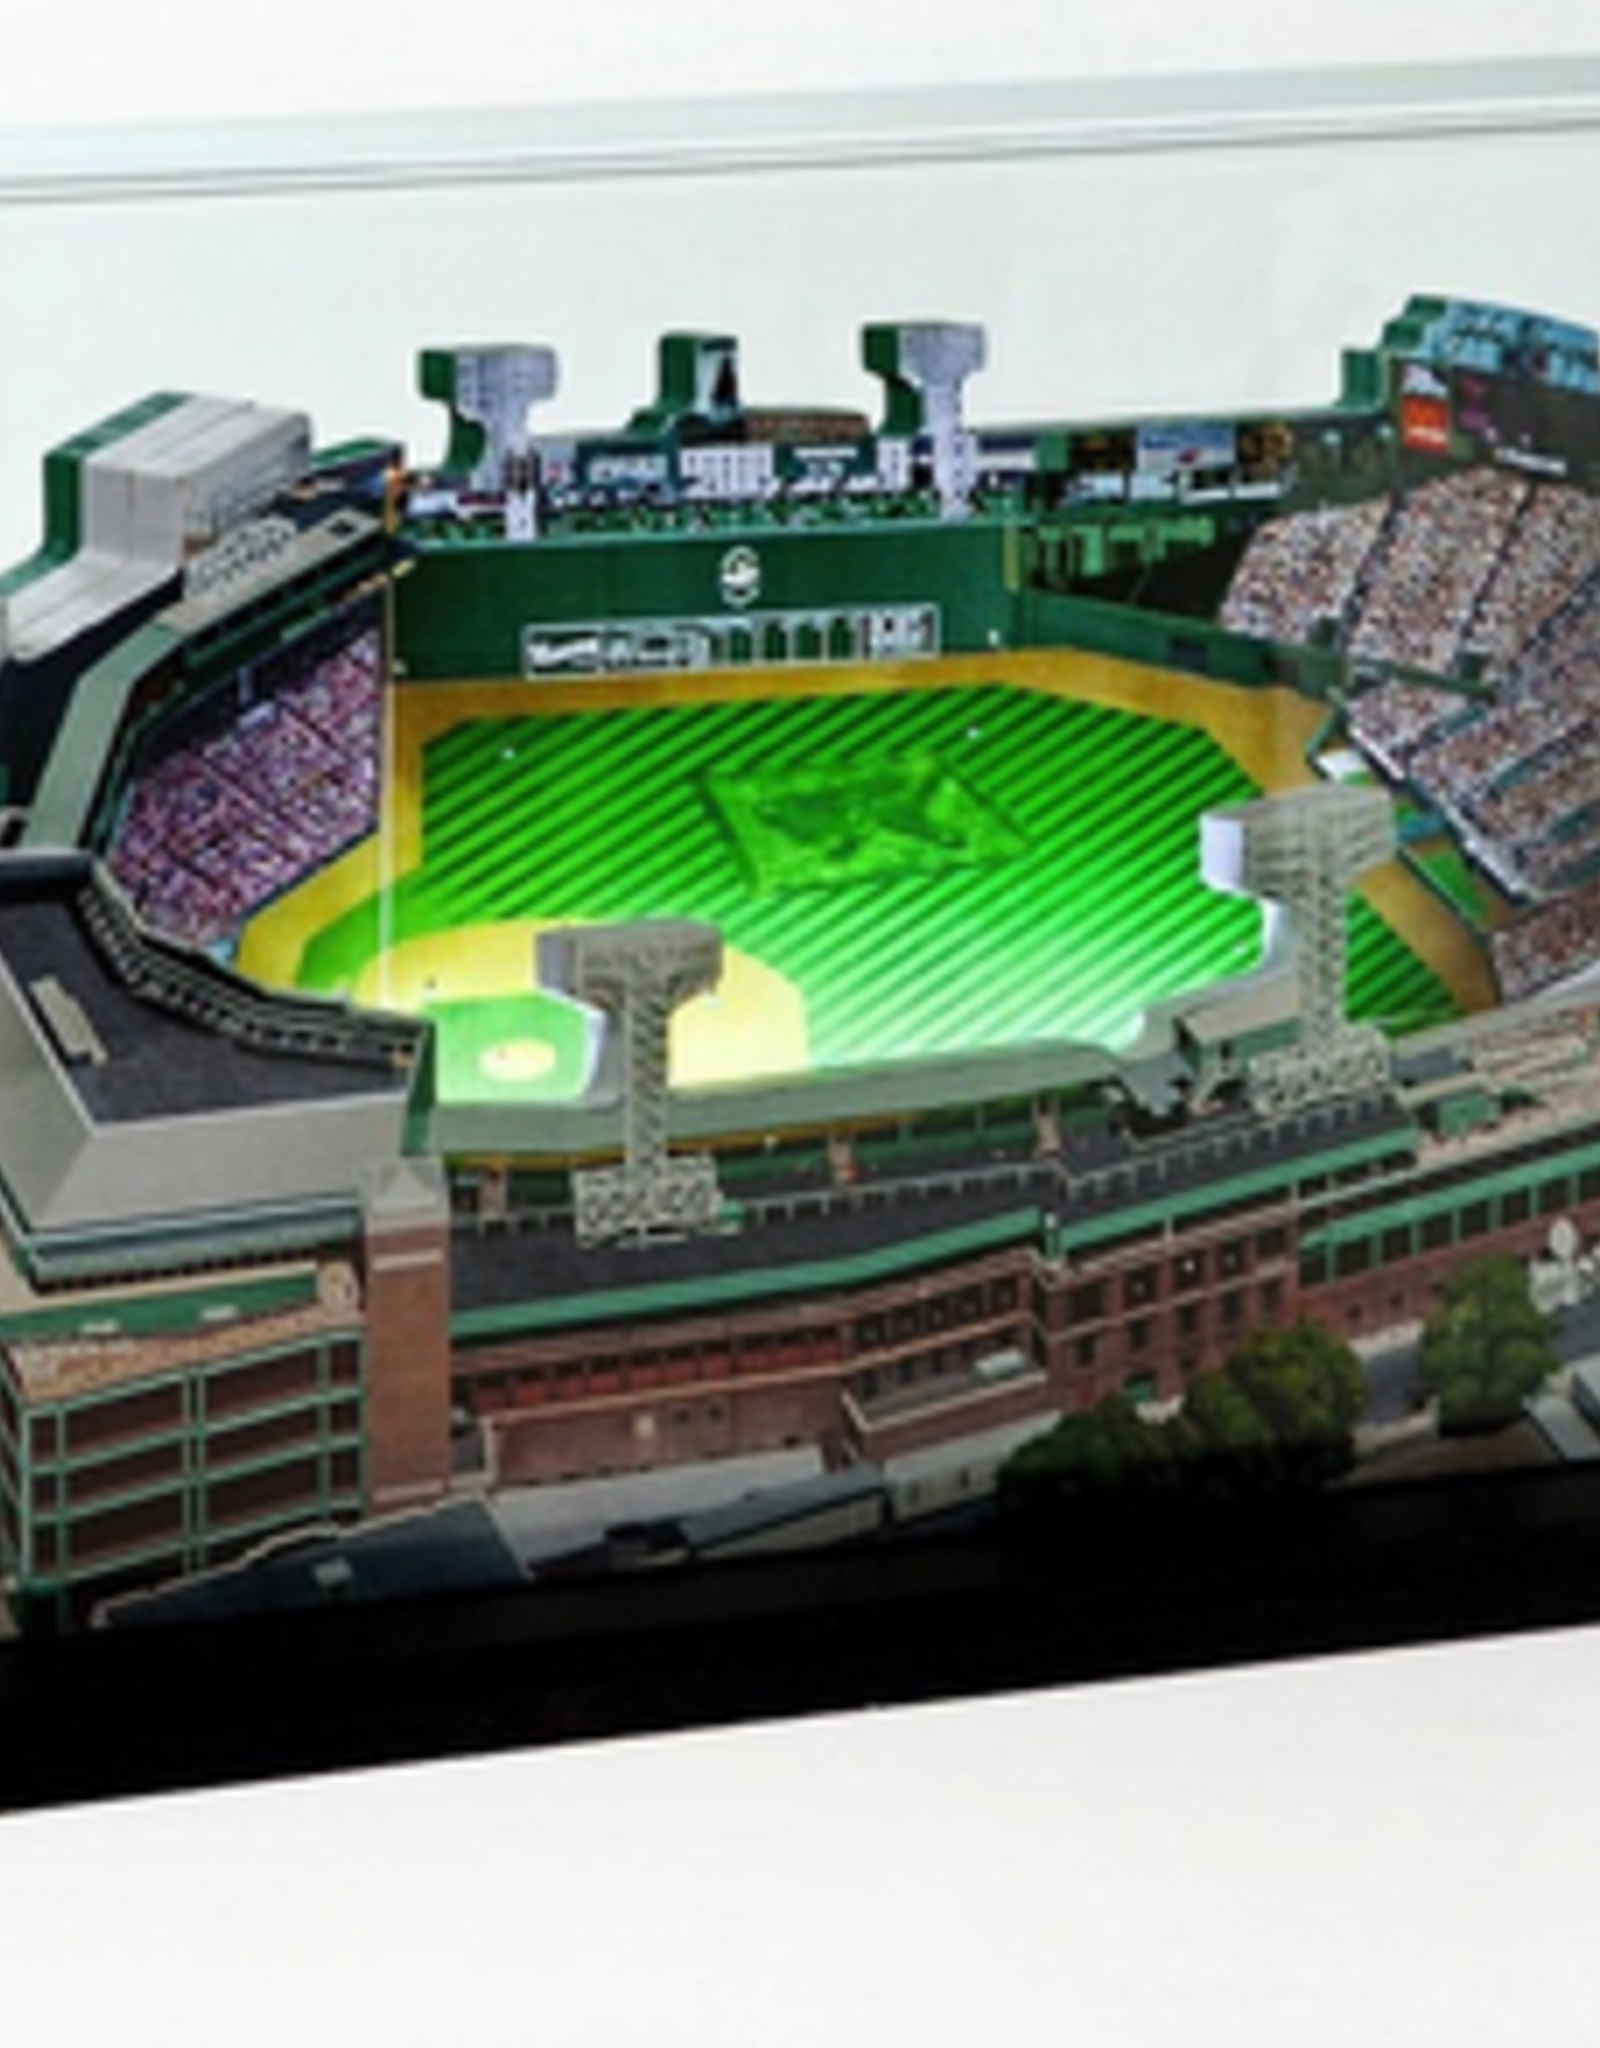 HOMEFIELDS Red Sox HomeField - Fenway Park 9IN